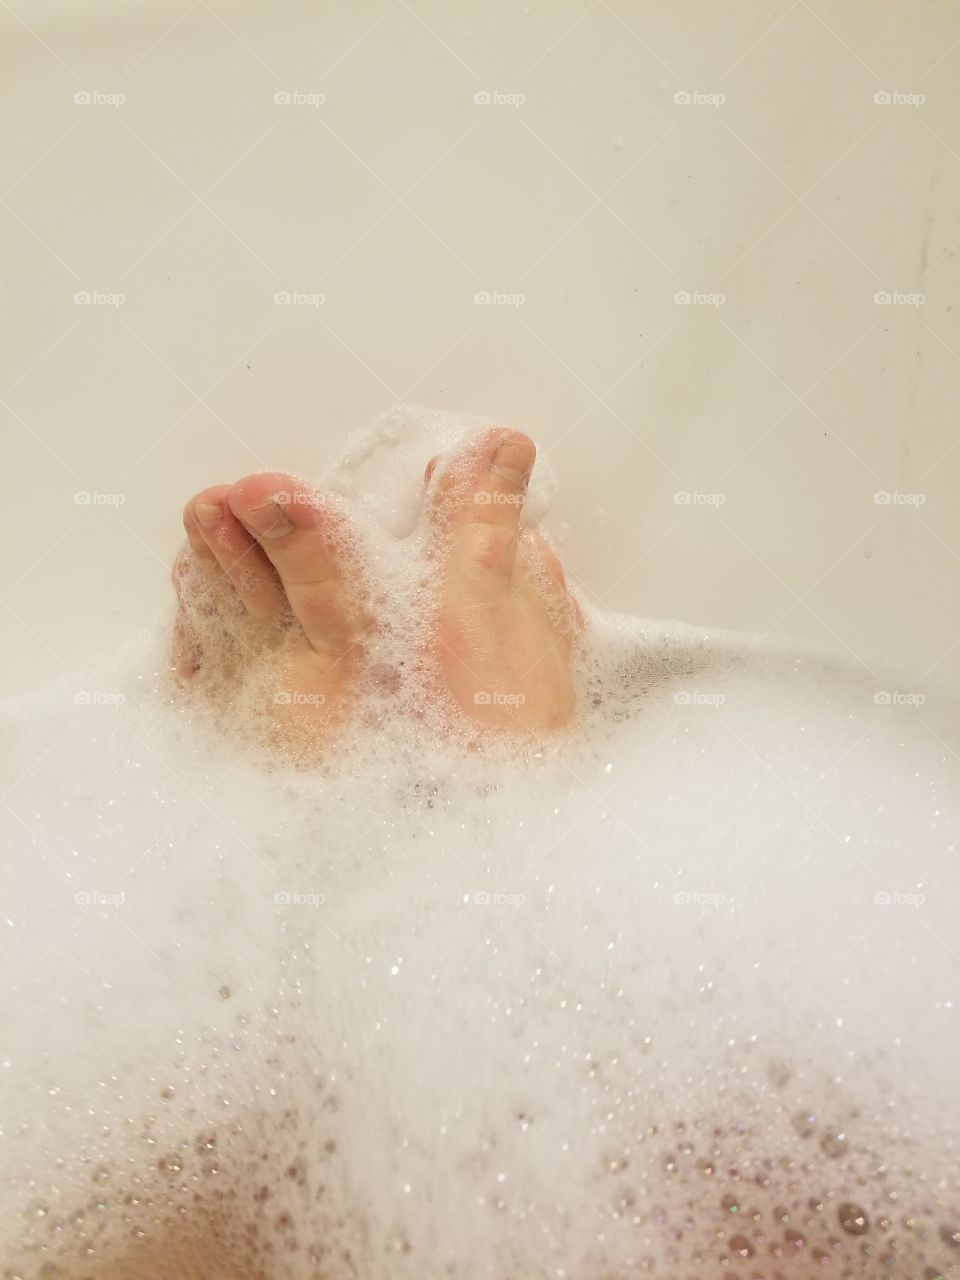 Feet covered in soap foam during bubble bath